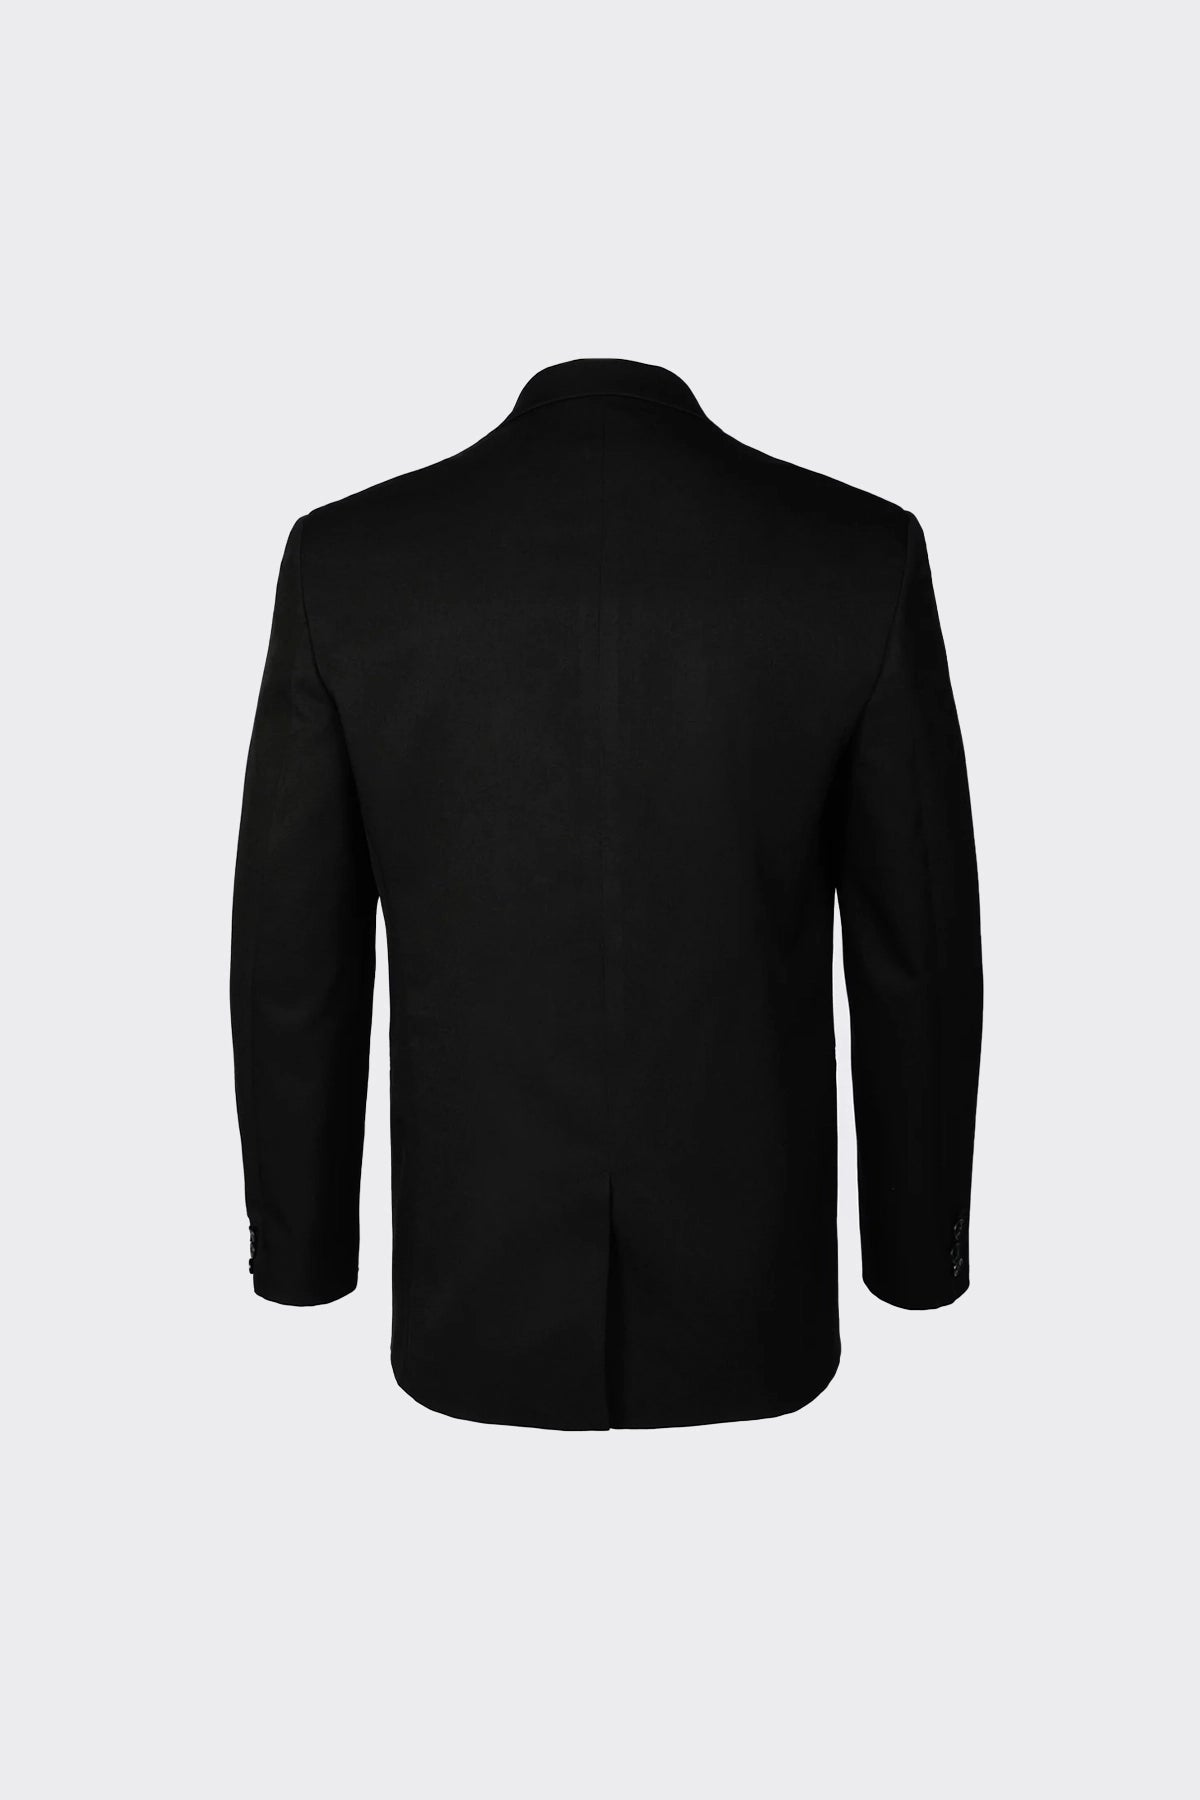 DOUBLE BREASTED SUIT JACKET